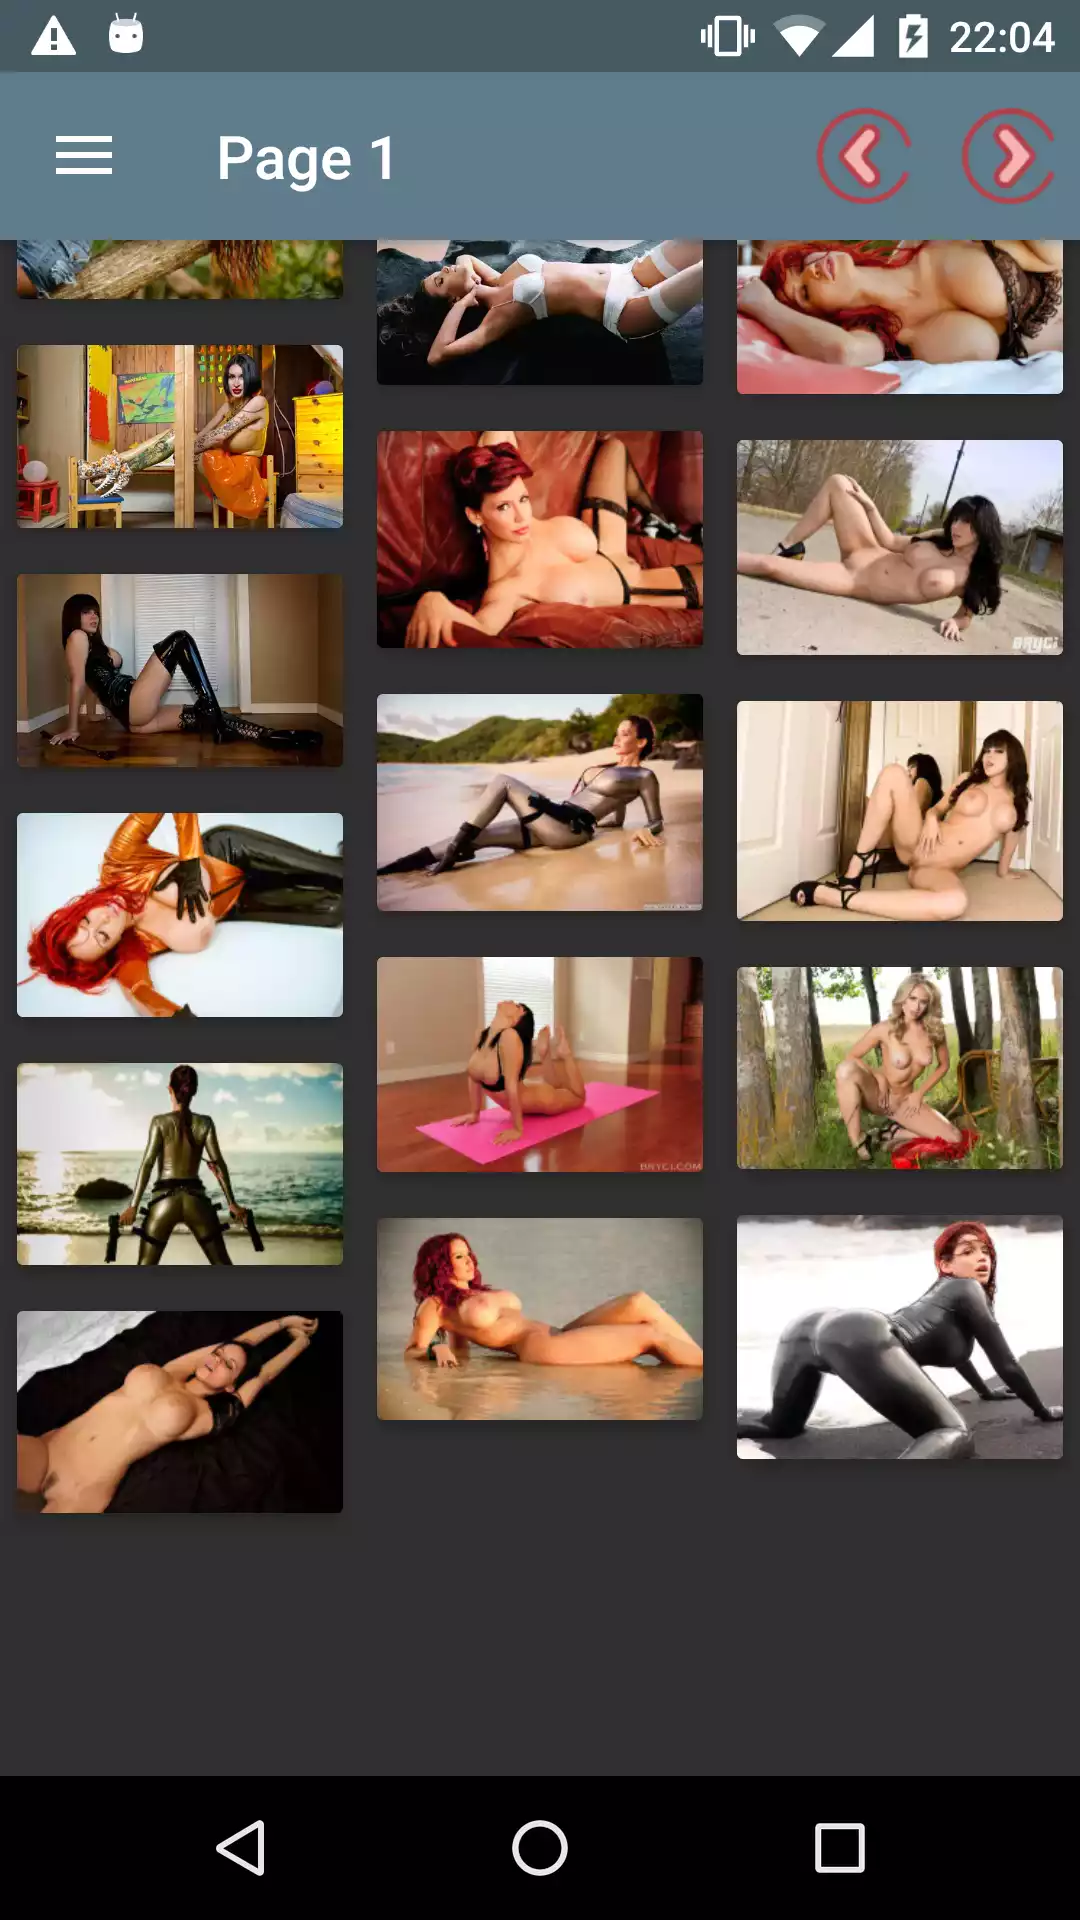 Hot Canadian Walls puzzle,for,pictures,free,pics,wallpaper,galleries,offline,hot,hentai,ann,download,app,sexy,hentia,porn,excuses,wallpapers,lisa,watching,photos,adult,apps,apk,have,caprice,that